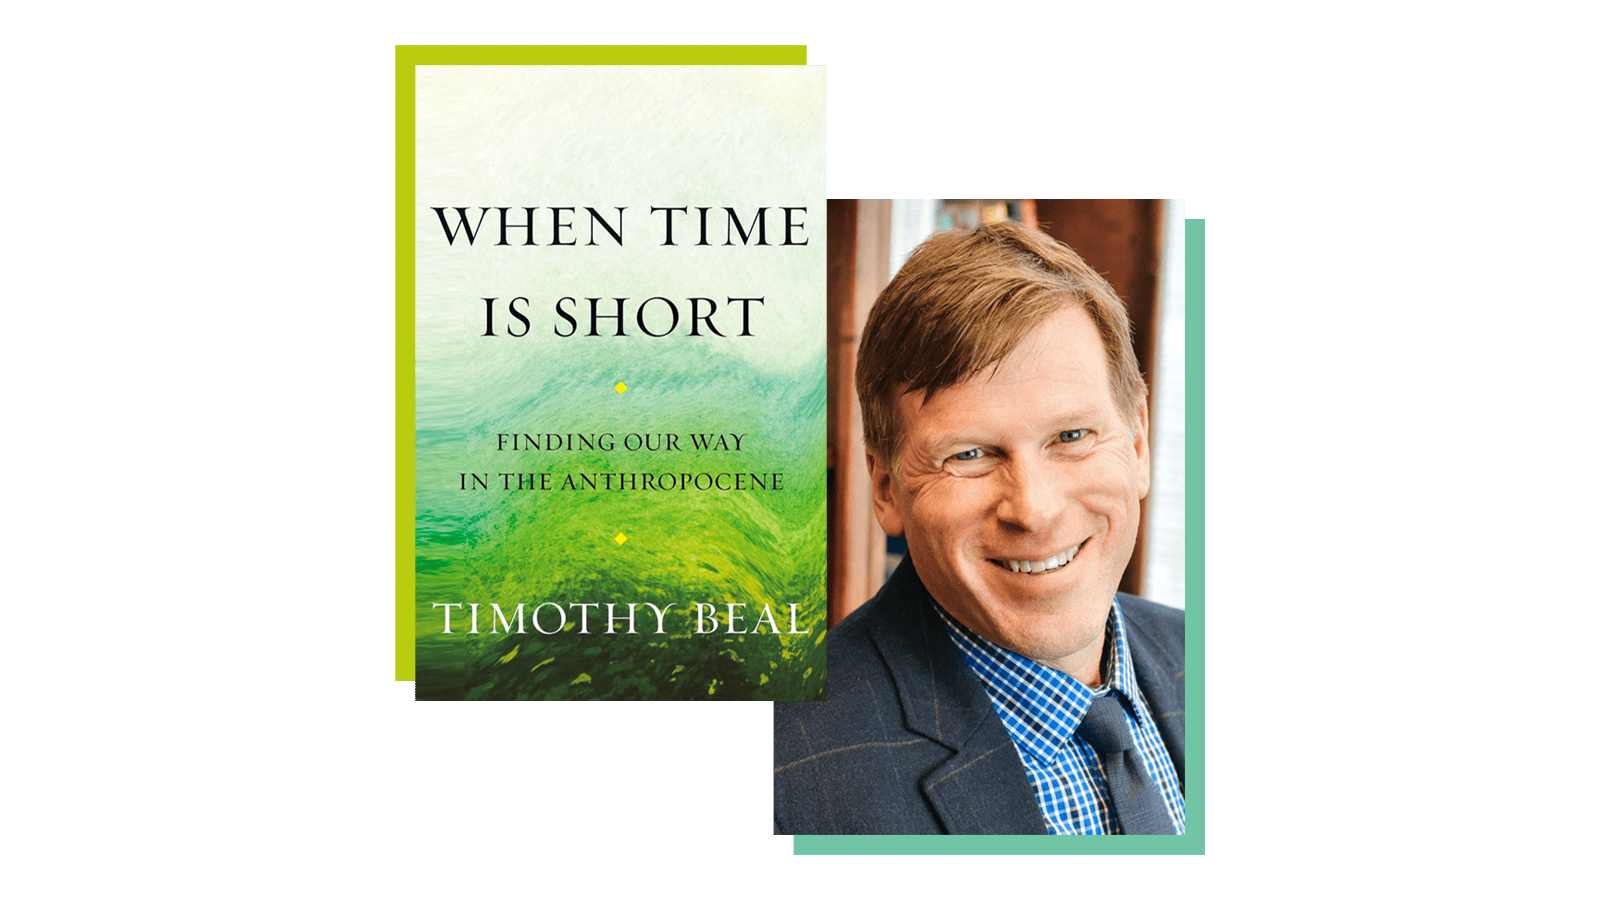 Collage: the cover of the book "When Time Is Short" by Timothy Beal, with a photo of the author to the right